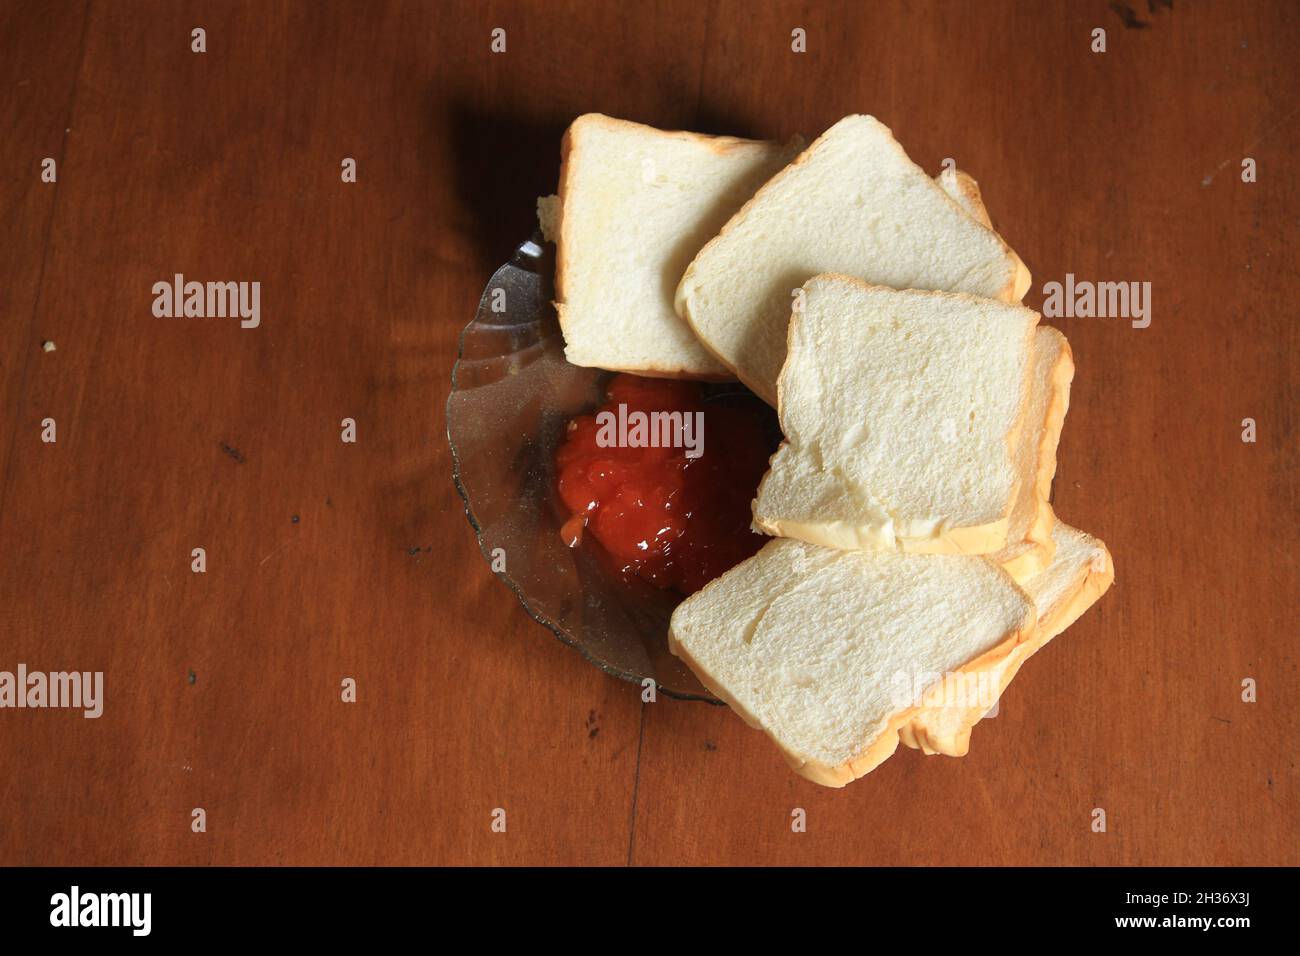 slices of fragrant white bread and fresh sauce for sandwiches, burgers, and more. Stock Photo